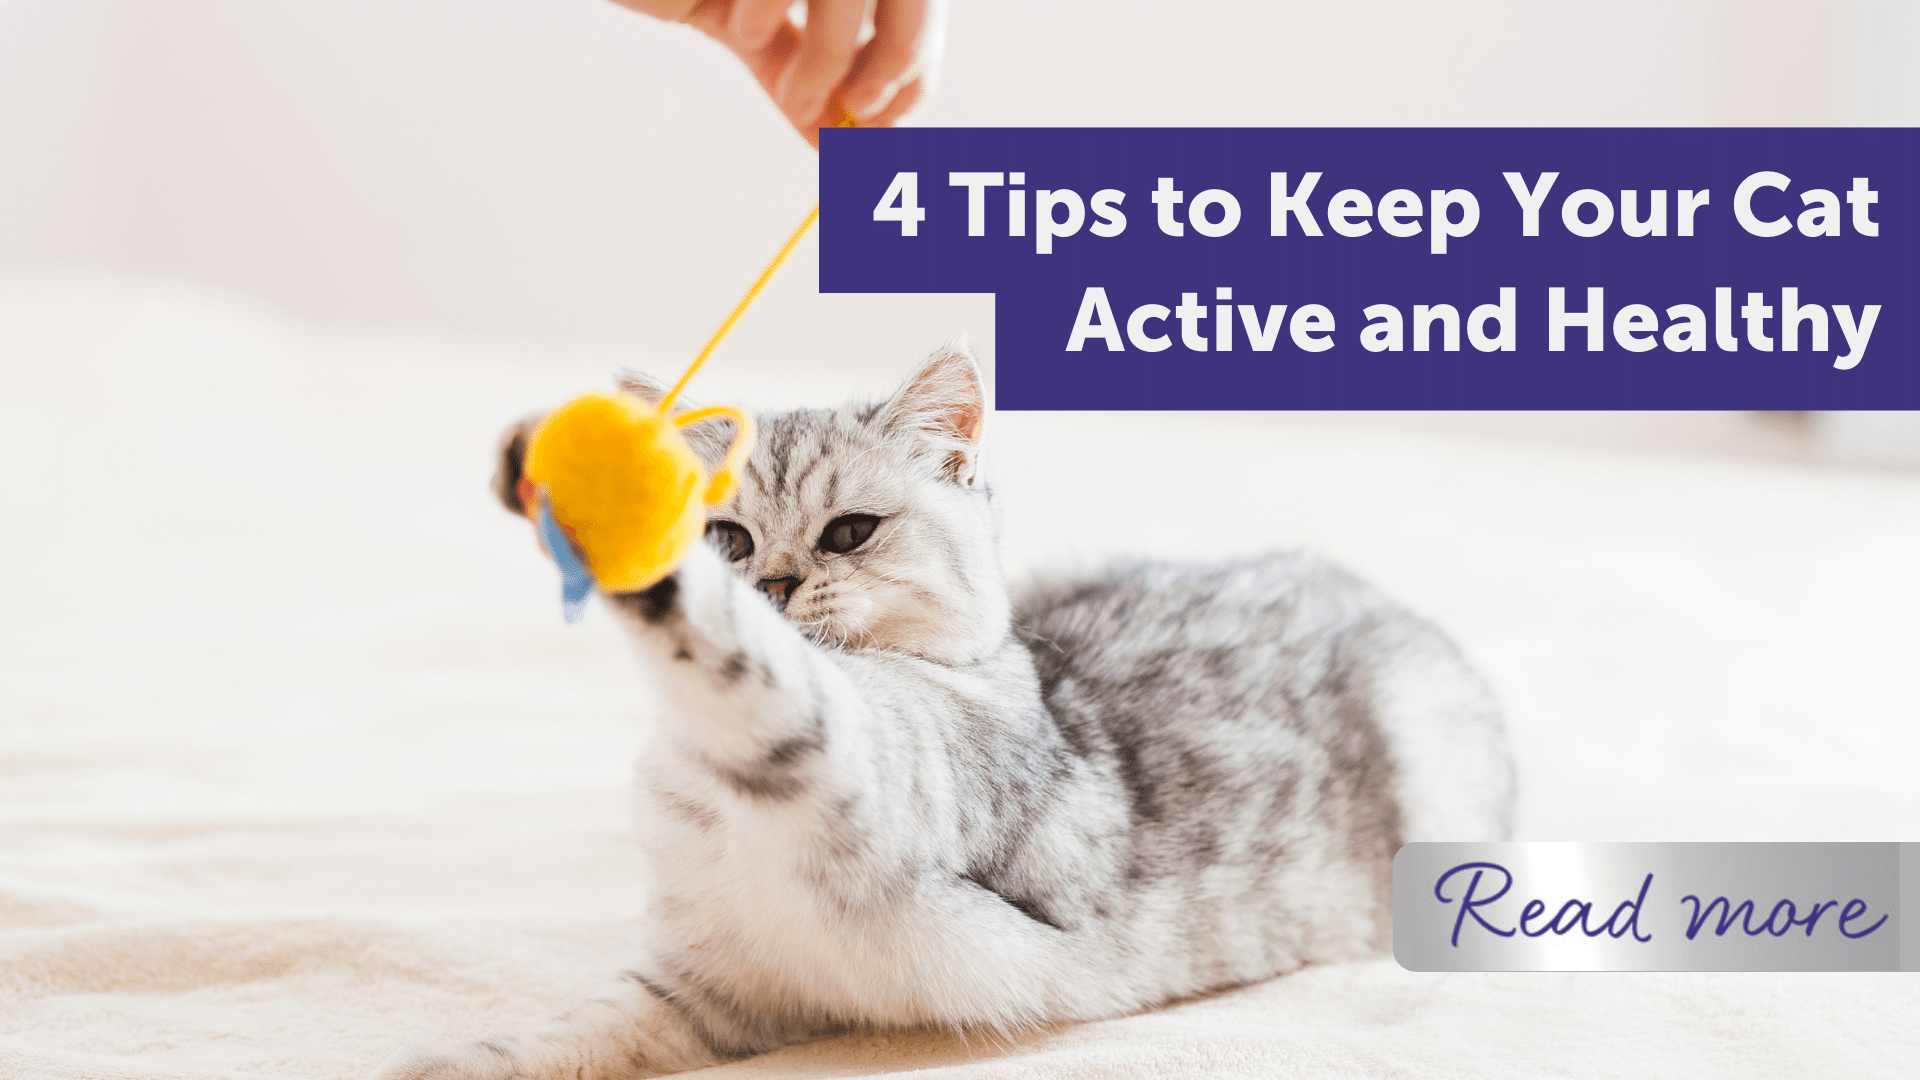 4 Tips To Keep Your Cat Active and Healthy